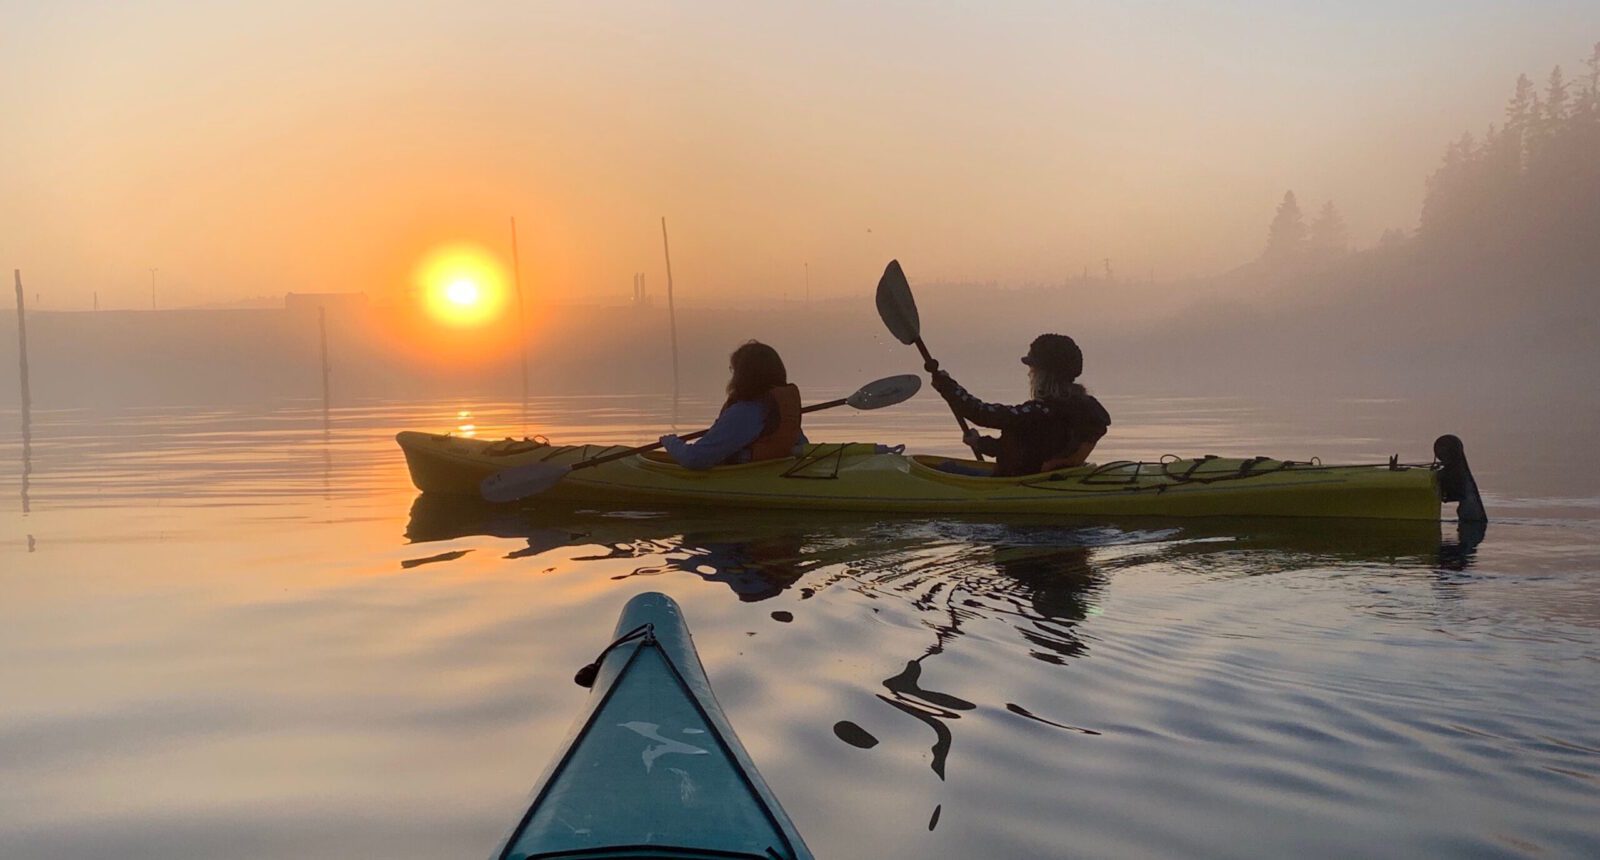 Two people paddling kayaks on a foggy morning.